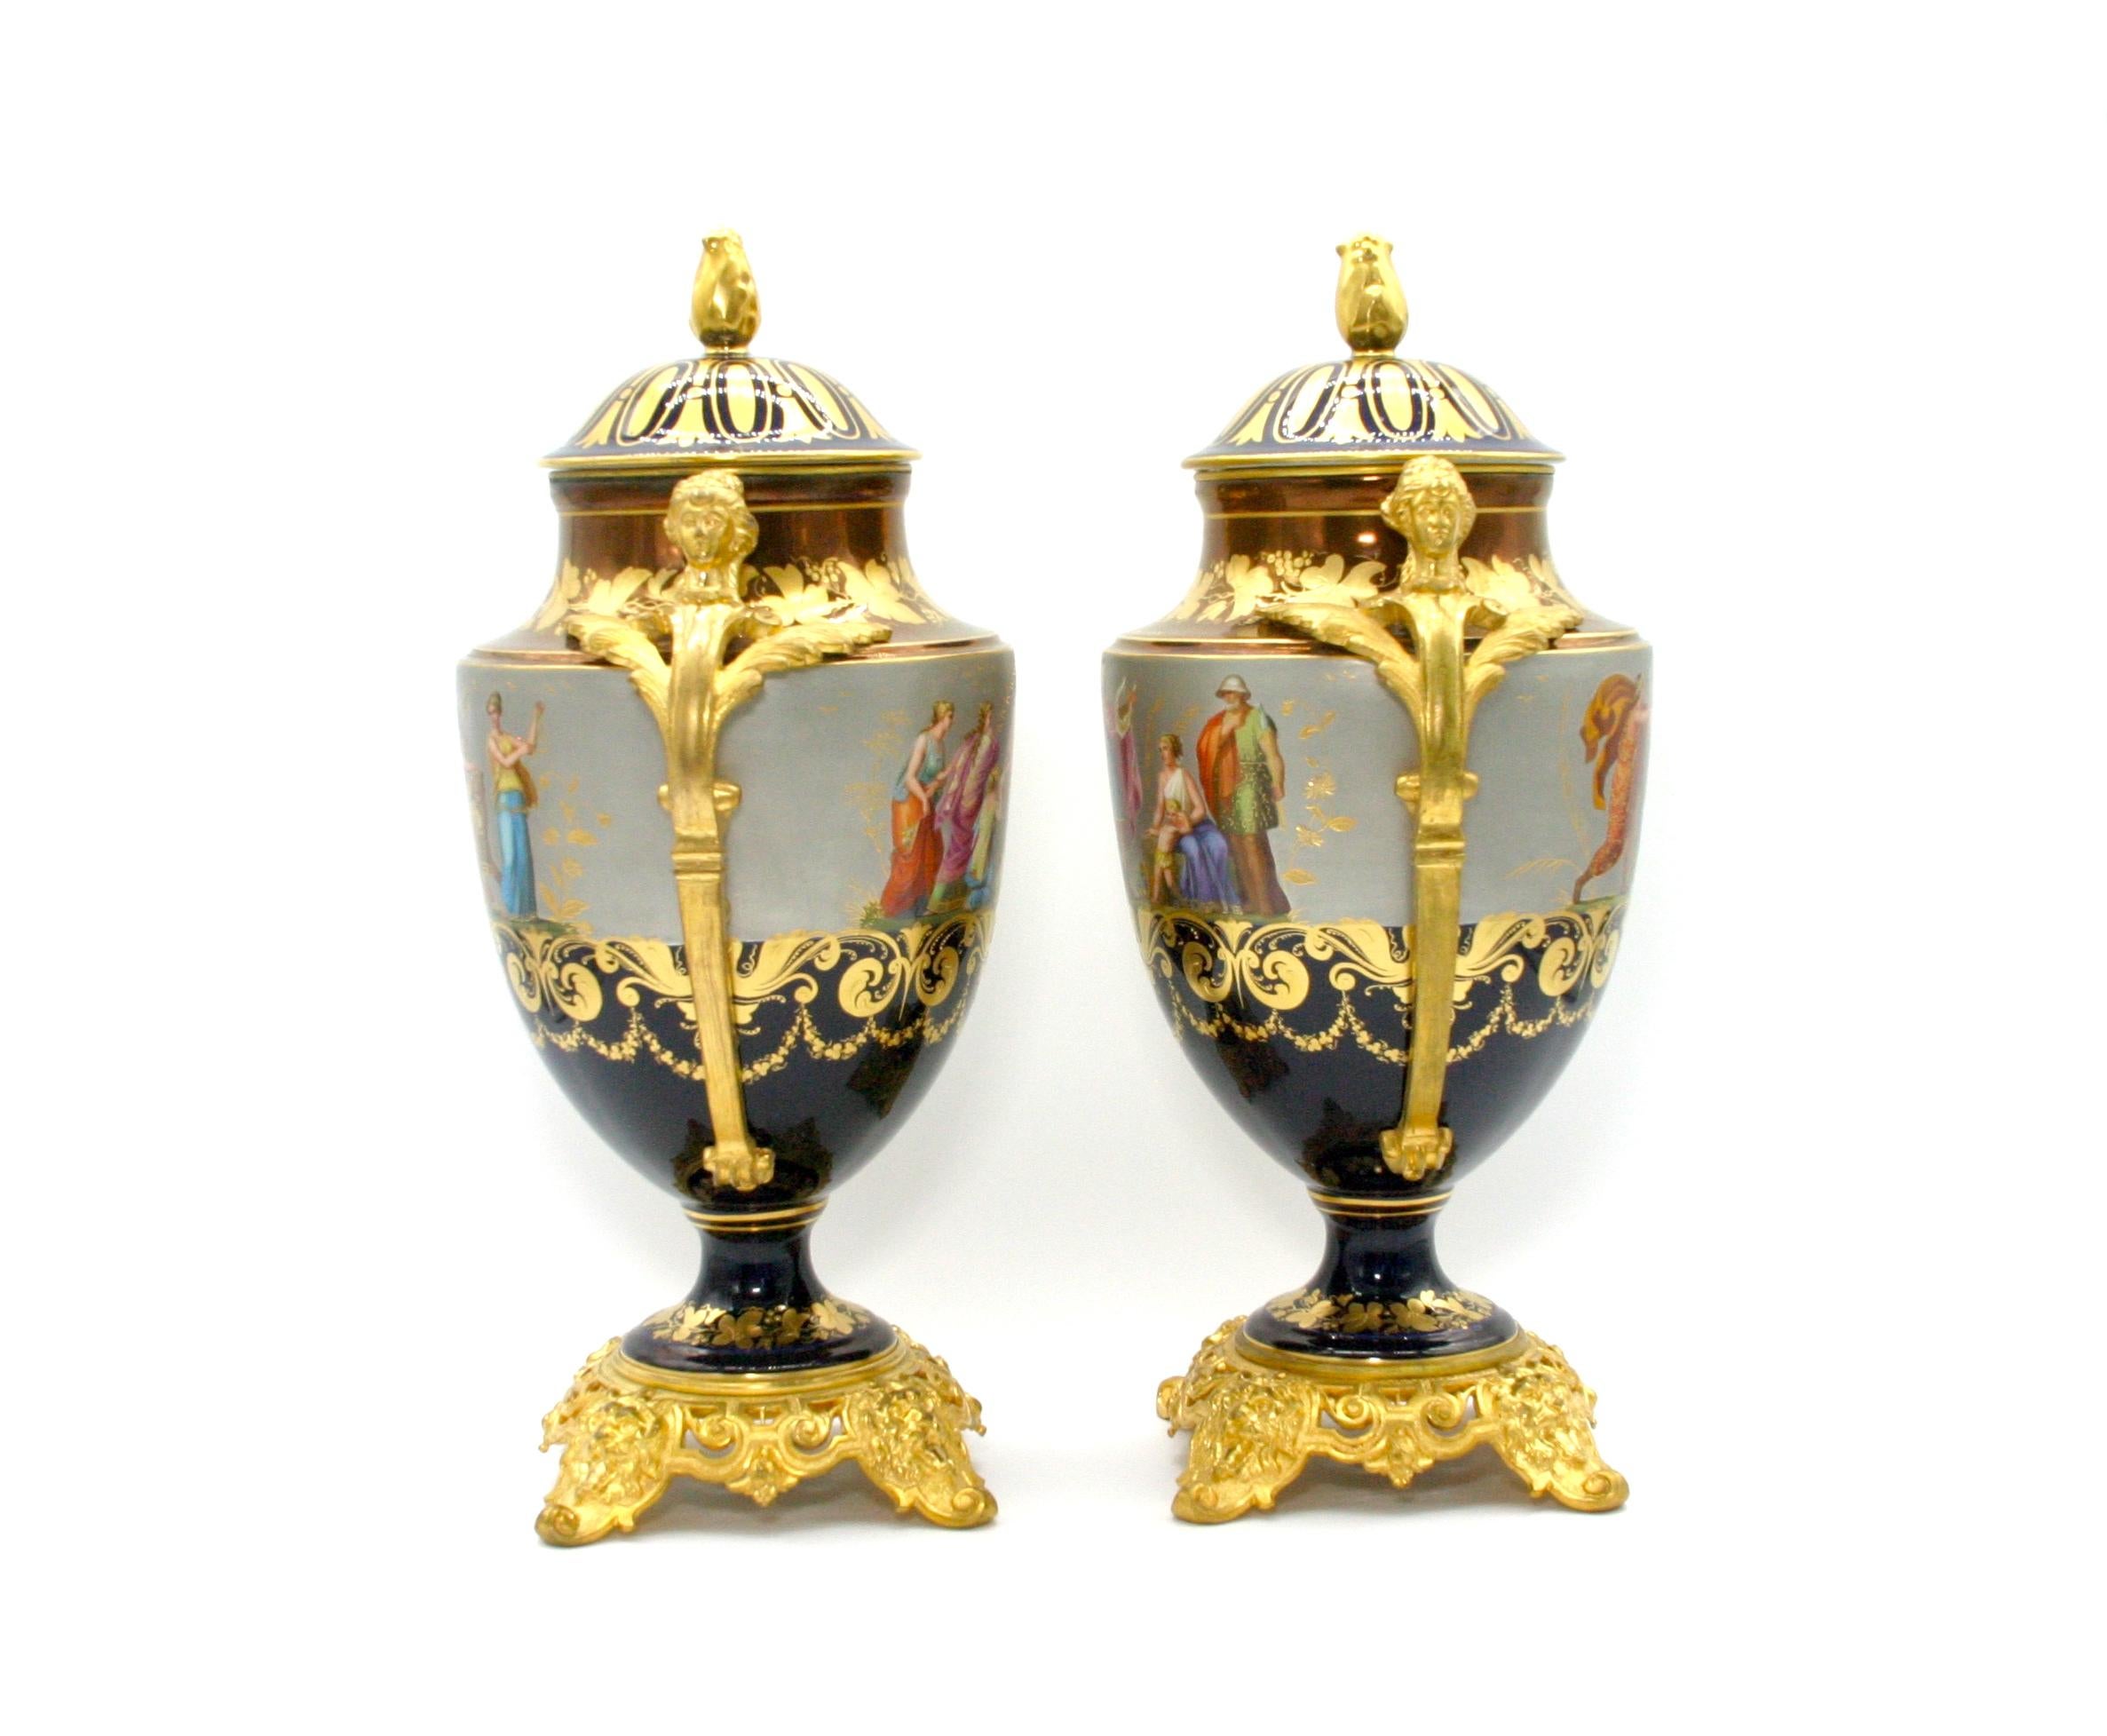 19th century gilt bronze mounted hand painted and crafted porcelain pair decorative covered urn / vase. Each urn features decorated figural design with bronze side handles with Greek mythological scenes. Each one in great antique. Minor wear